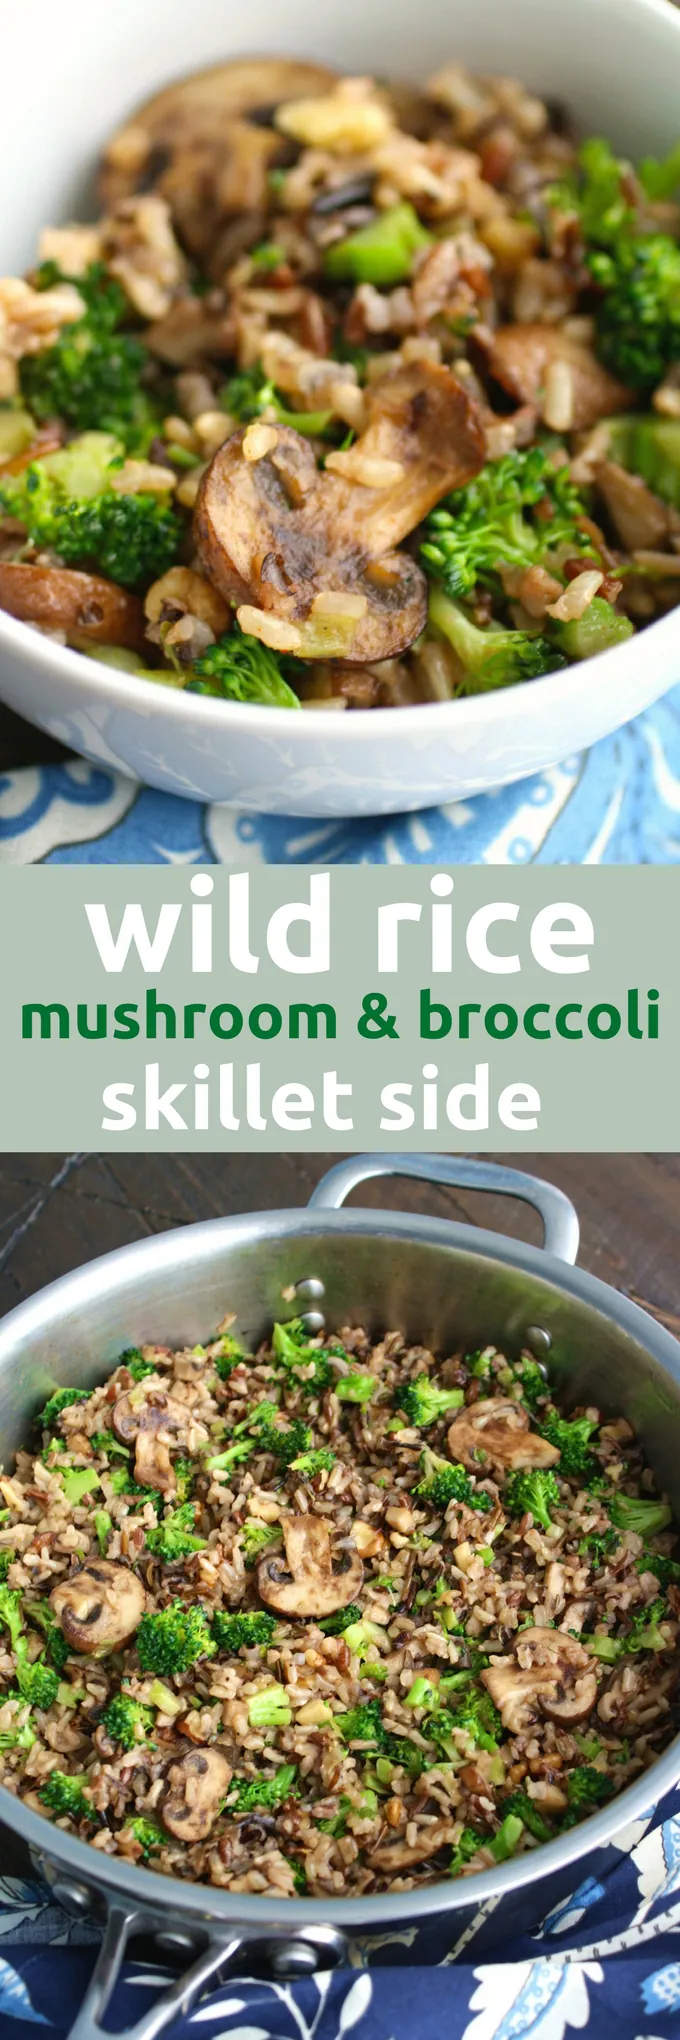 Wild Rice Mushroom and Broccoli Skillet Side is a great side dish for any meal, including the holidays! You'll love this side dish with wild rice as the star!